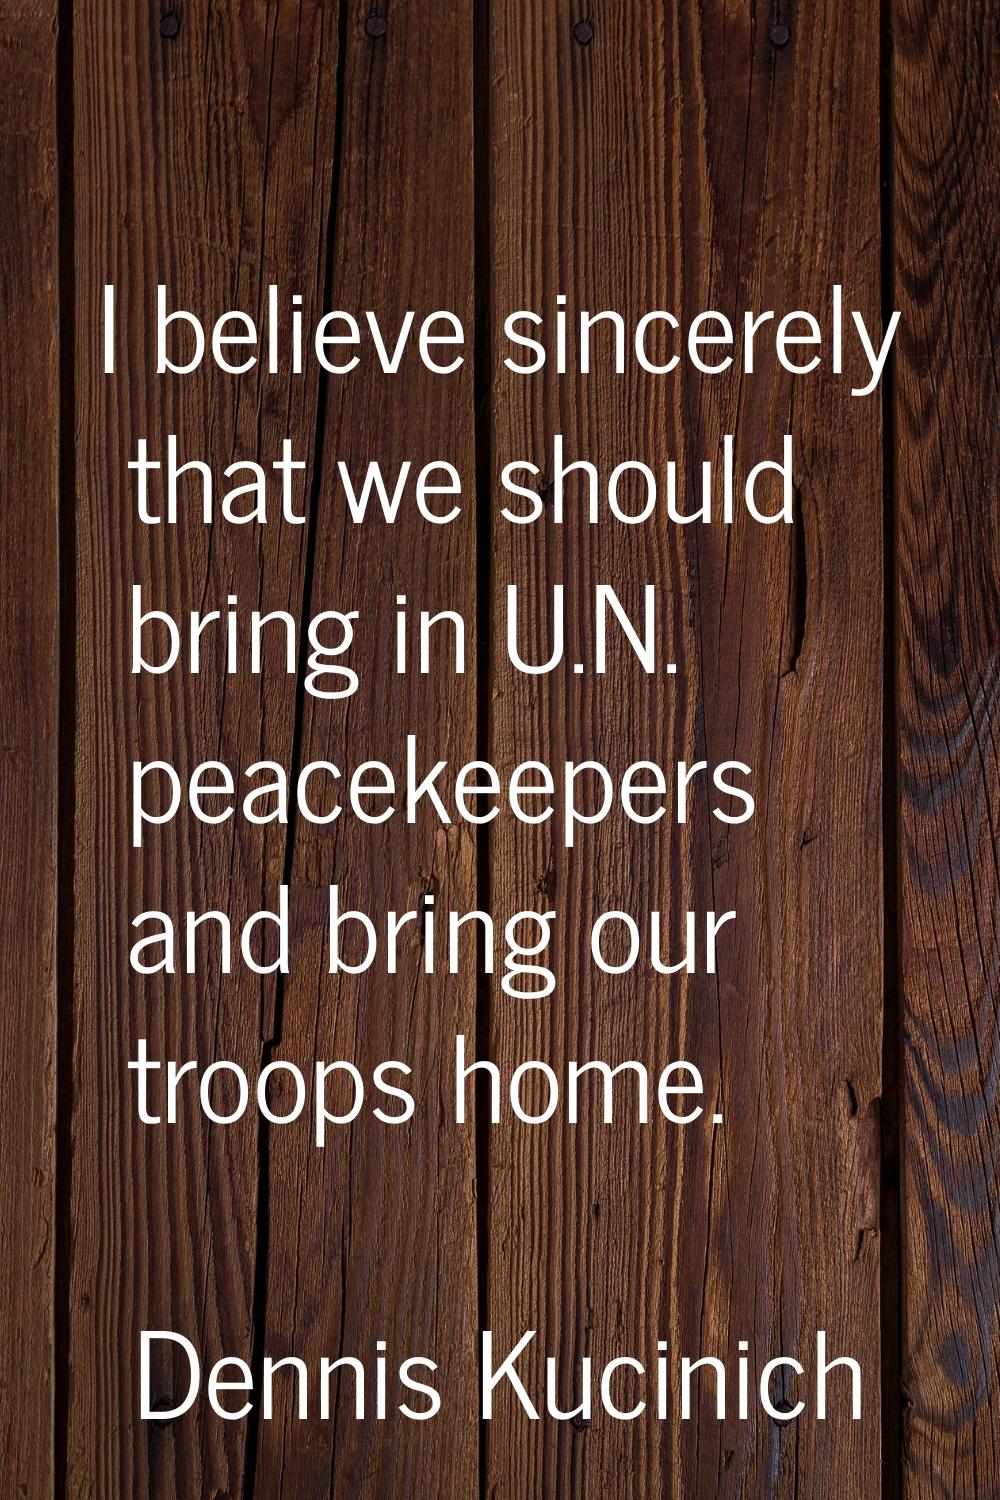 I believe sincerely that we should bring in U.N. peacekeepers and bring our troops home.